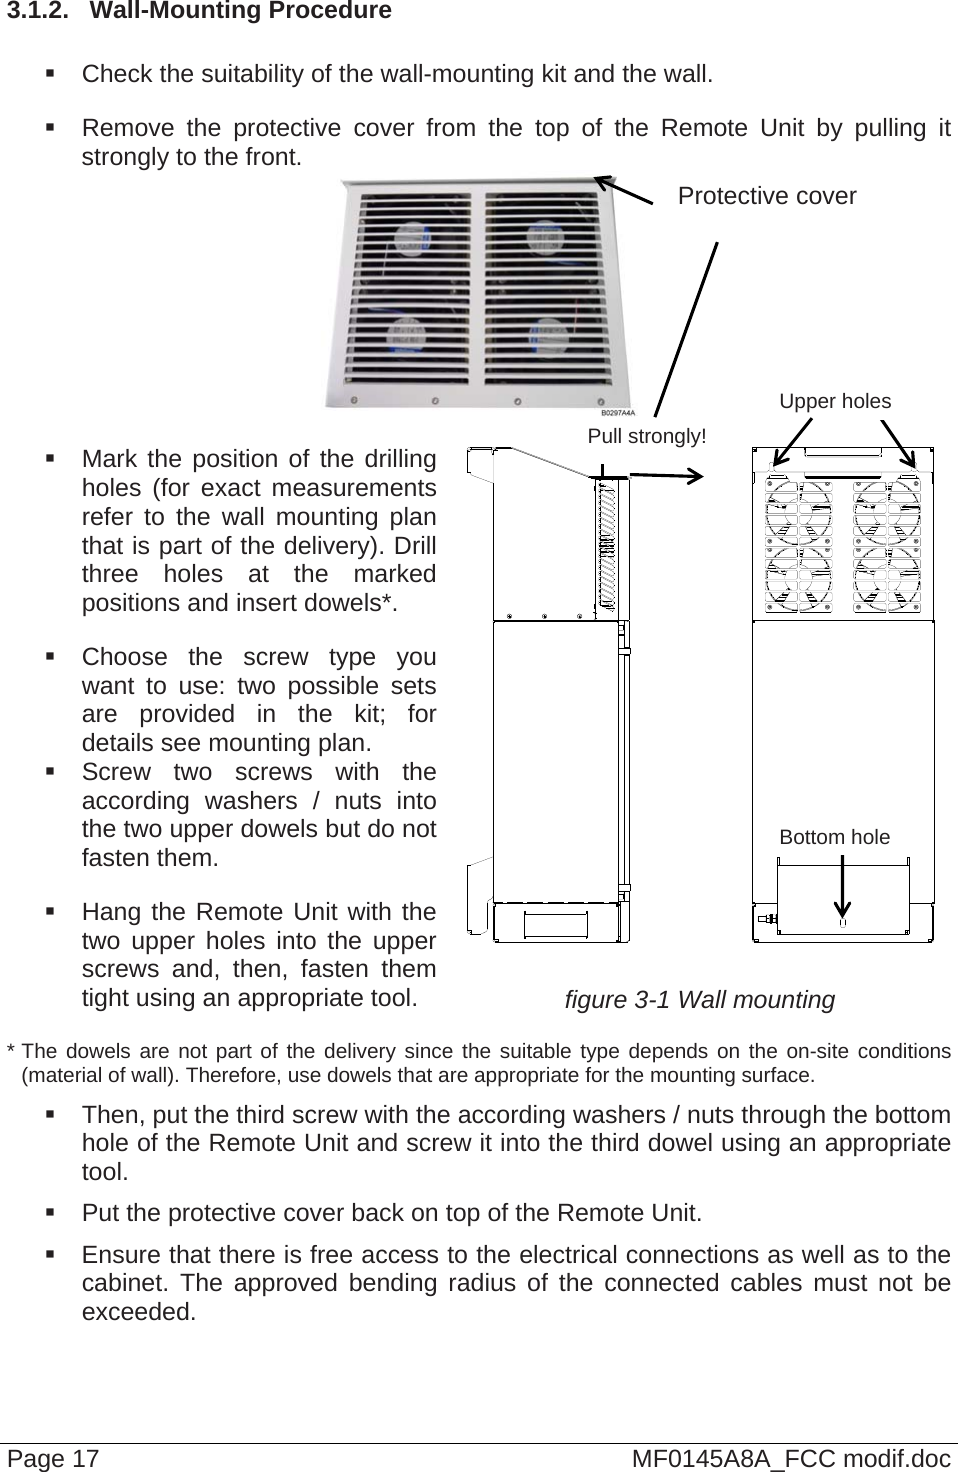  3.1.2.  Wall-Mounting Procedure    Check the suitability of the wall-mounting kit and the wall.   Remove the protective cover from the top of the Remote Unit by pulling it strongly to the front.  Page 17  MF0145A8A_FCC modif.doc    Mark the position of the drilling holes (for exact measurements refer to the wall mounting plan that is part of the delivery). Drill three holes at the marked positions and insert dowels*.   Choose the screw type you want to use: two possible sets are provided in the kit; for details see mounting plan.  Screw two screws with the according washers / nuts into the two upper dowels but do not fasten them.   Hang the Remote Unit with the two upper holes into the upper screws and, then, fasten them tight using an appropriate tool.    figure 3-1 Wall mounting * The dowels are not part of the delivery since the suitable type depends on the on-site conditions (material of wall). Therefore, use dowels that are appropriate for the mounting surface.   Then, put the third screw with the according washers / nuts through the bottom hole of the Remote Unit and screw it into the third dowel using an appropriate tool.   Put the protective cover back on top of the Remote Unit.   Ensure that there is free access to the electrical connections as well as to the cabinet. The approved bending radius of the connected cables must not be exceeded. Bottom hole Upper holes Protective cover Pull strongly! 